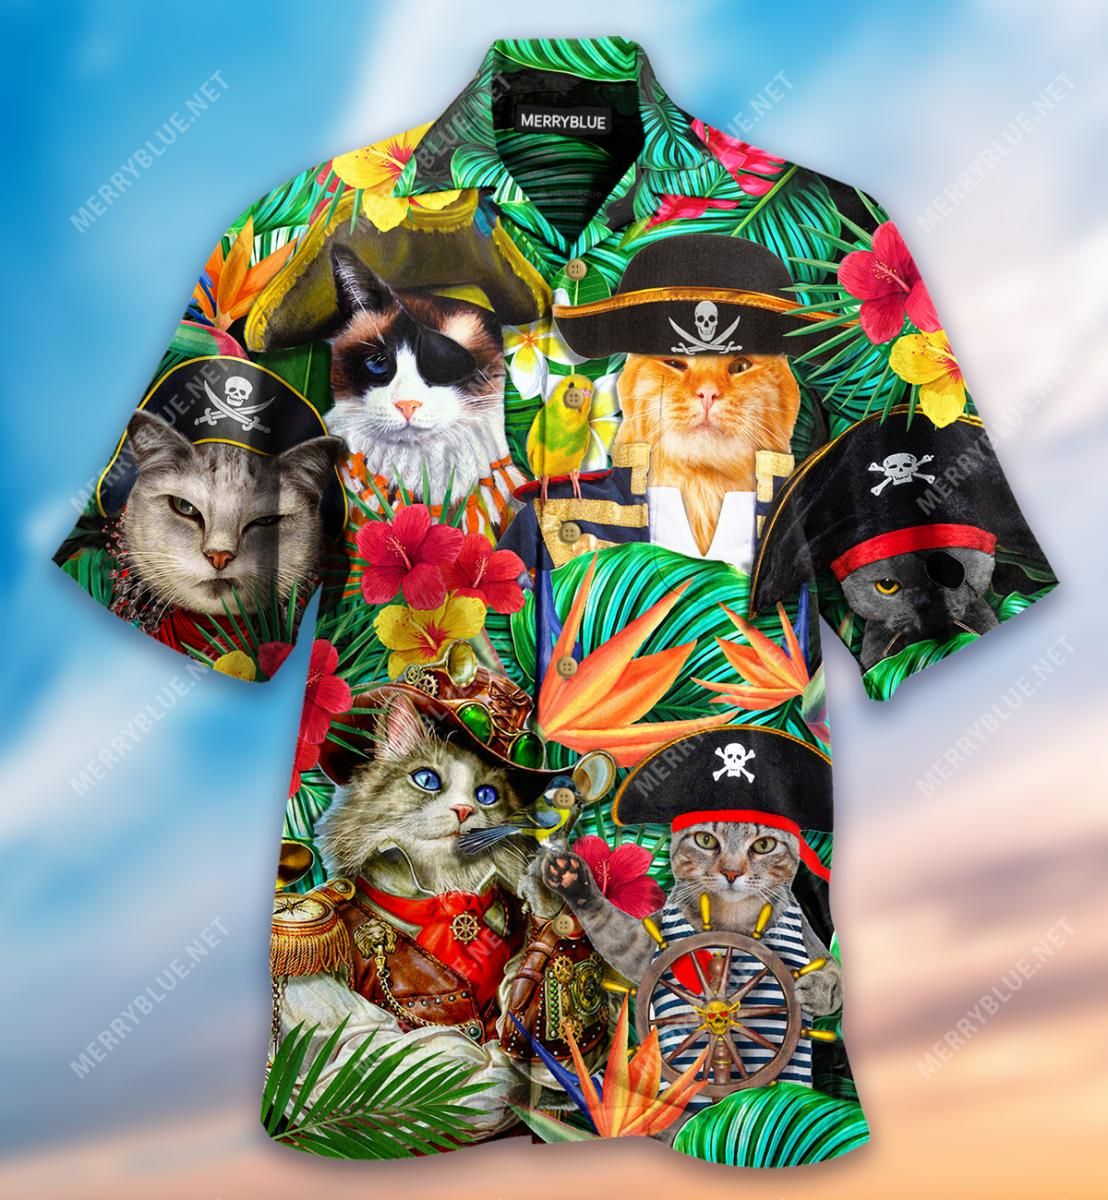 Let’S Chill With Christmas Guitar Aloha Hawaiian Shirt Colorful Short Sleeve Summer Beach Casual Shirt For Men And Women